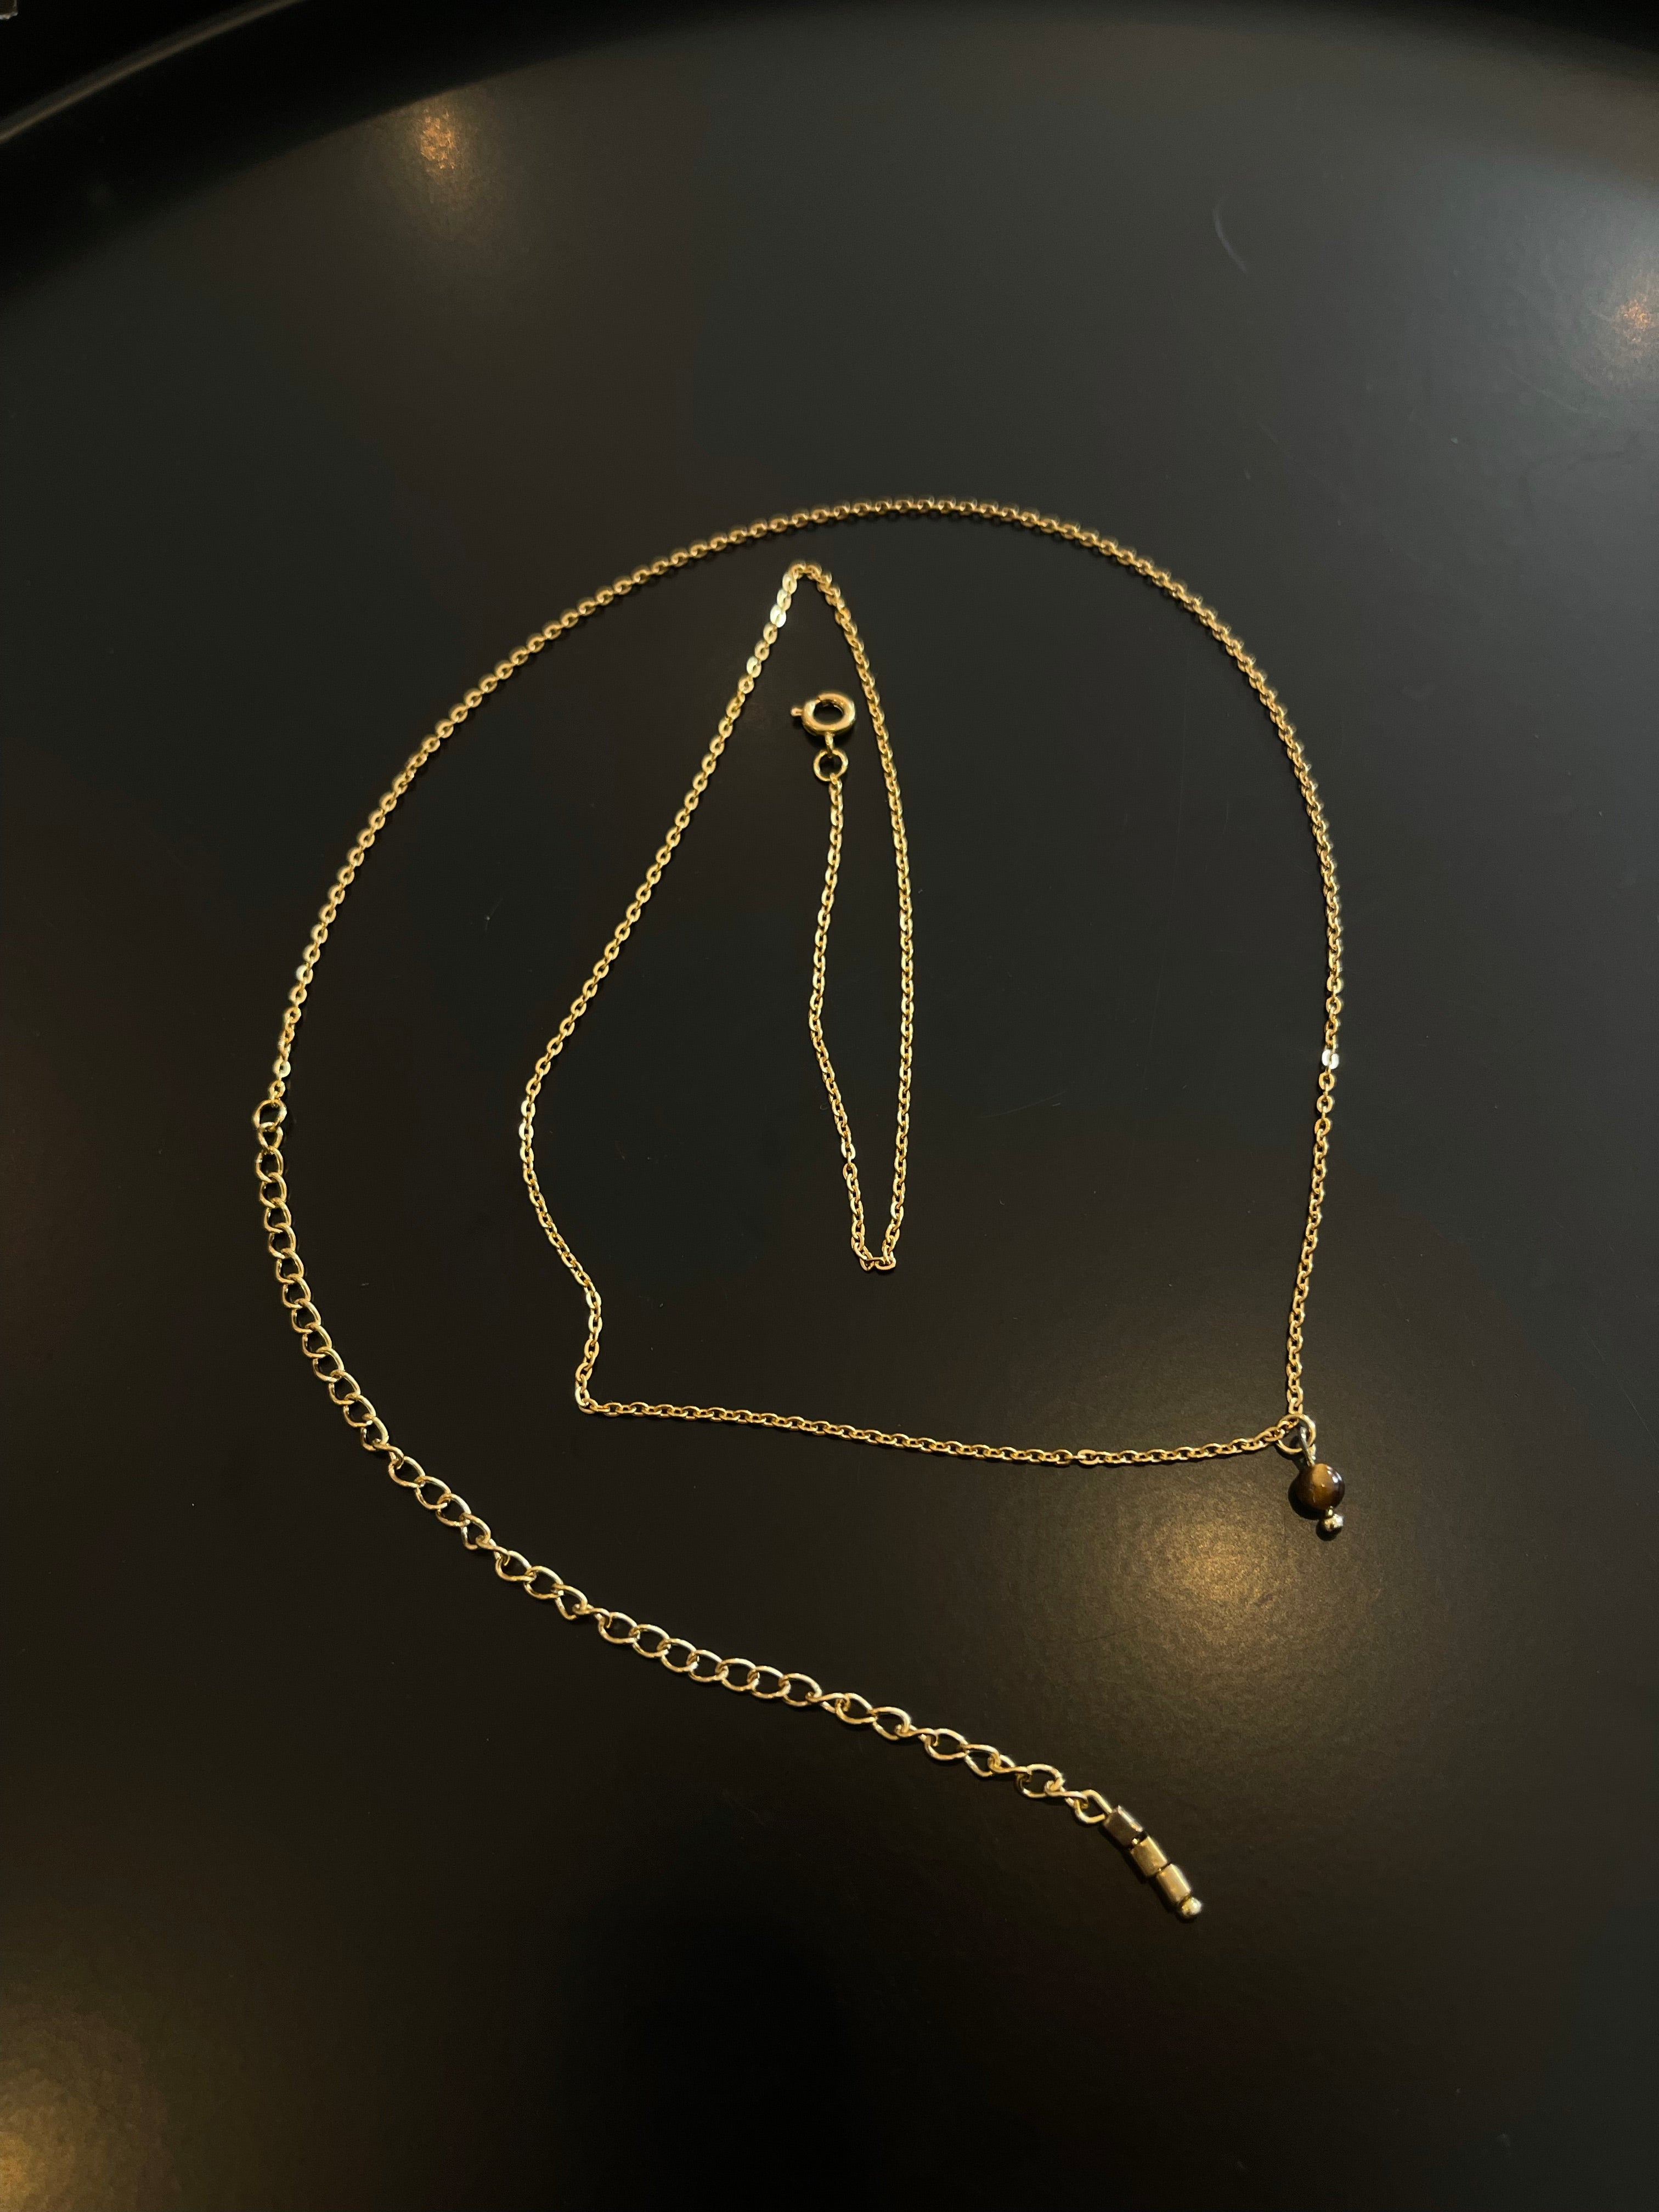 Golden minimalistic body chain with three square tiger eye gemstones at the end and one round tiger eye pendant.